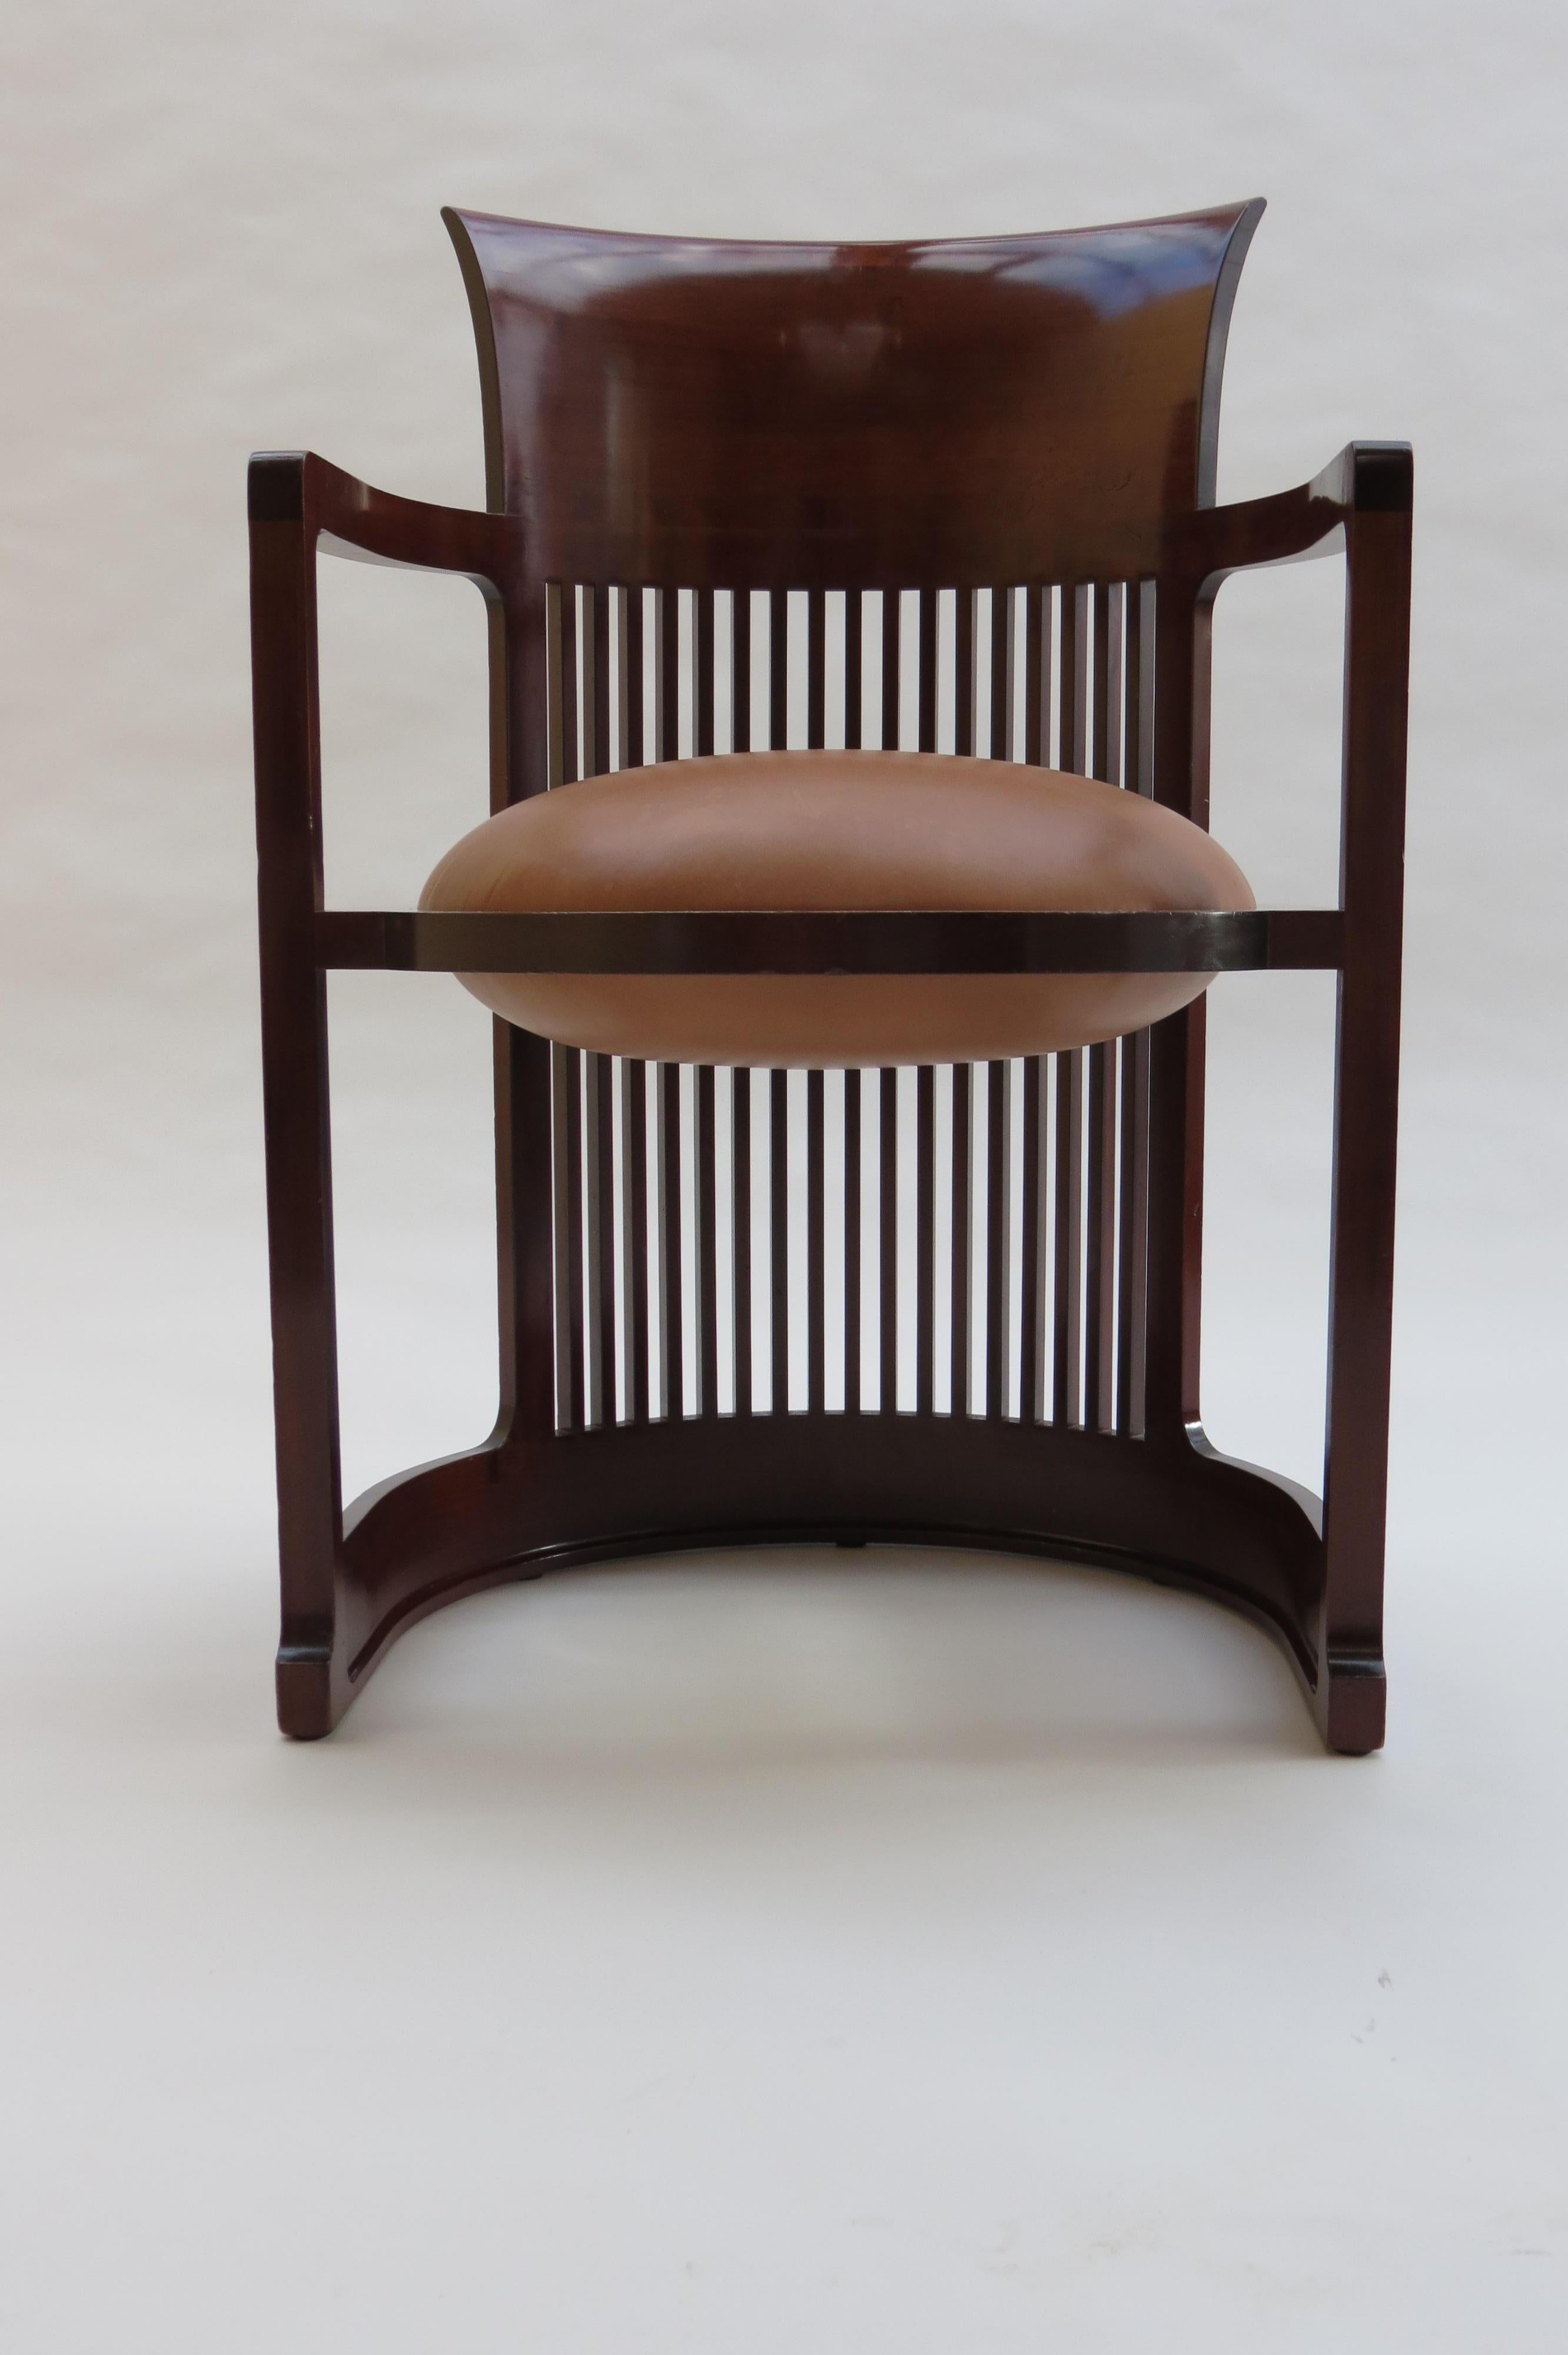 A Taliesin Barrel chair, designed by Frank Lloyd Wright and produced by Cassina.
This design classic was produced in 1986 and is made from solid Cherry wood and a newly recovered ball seat cushion in leather.
The chair retains the original makers